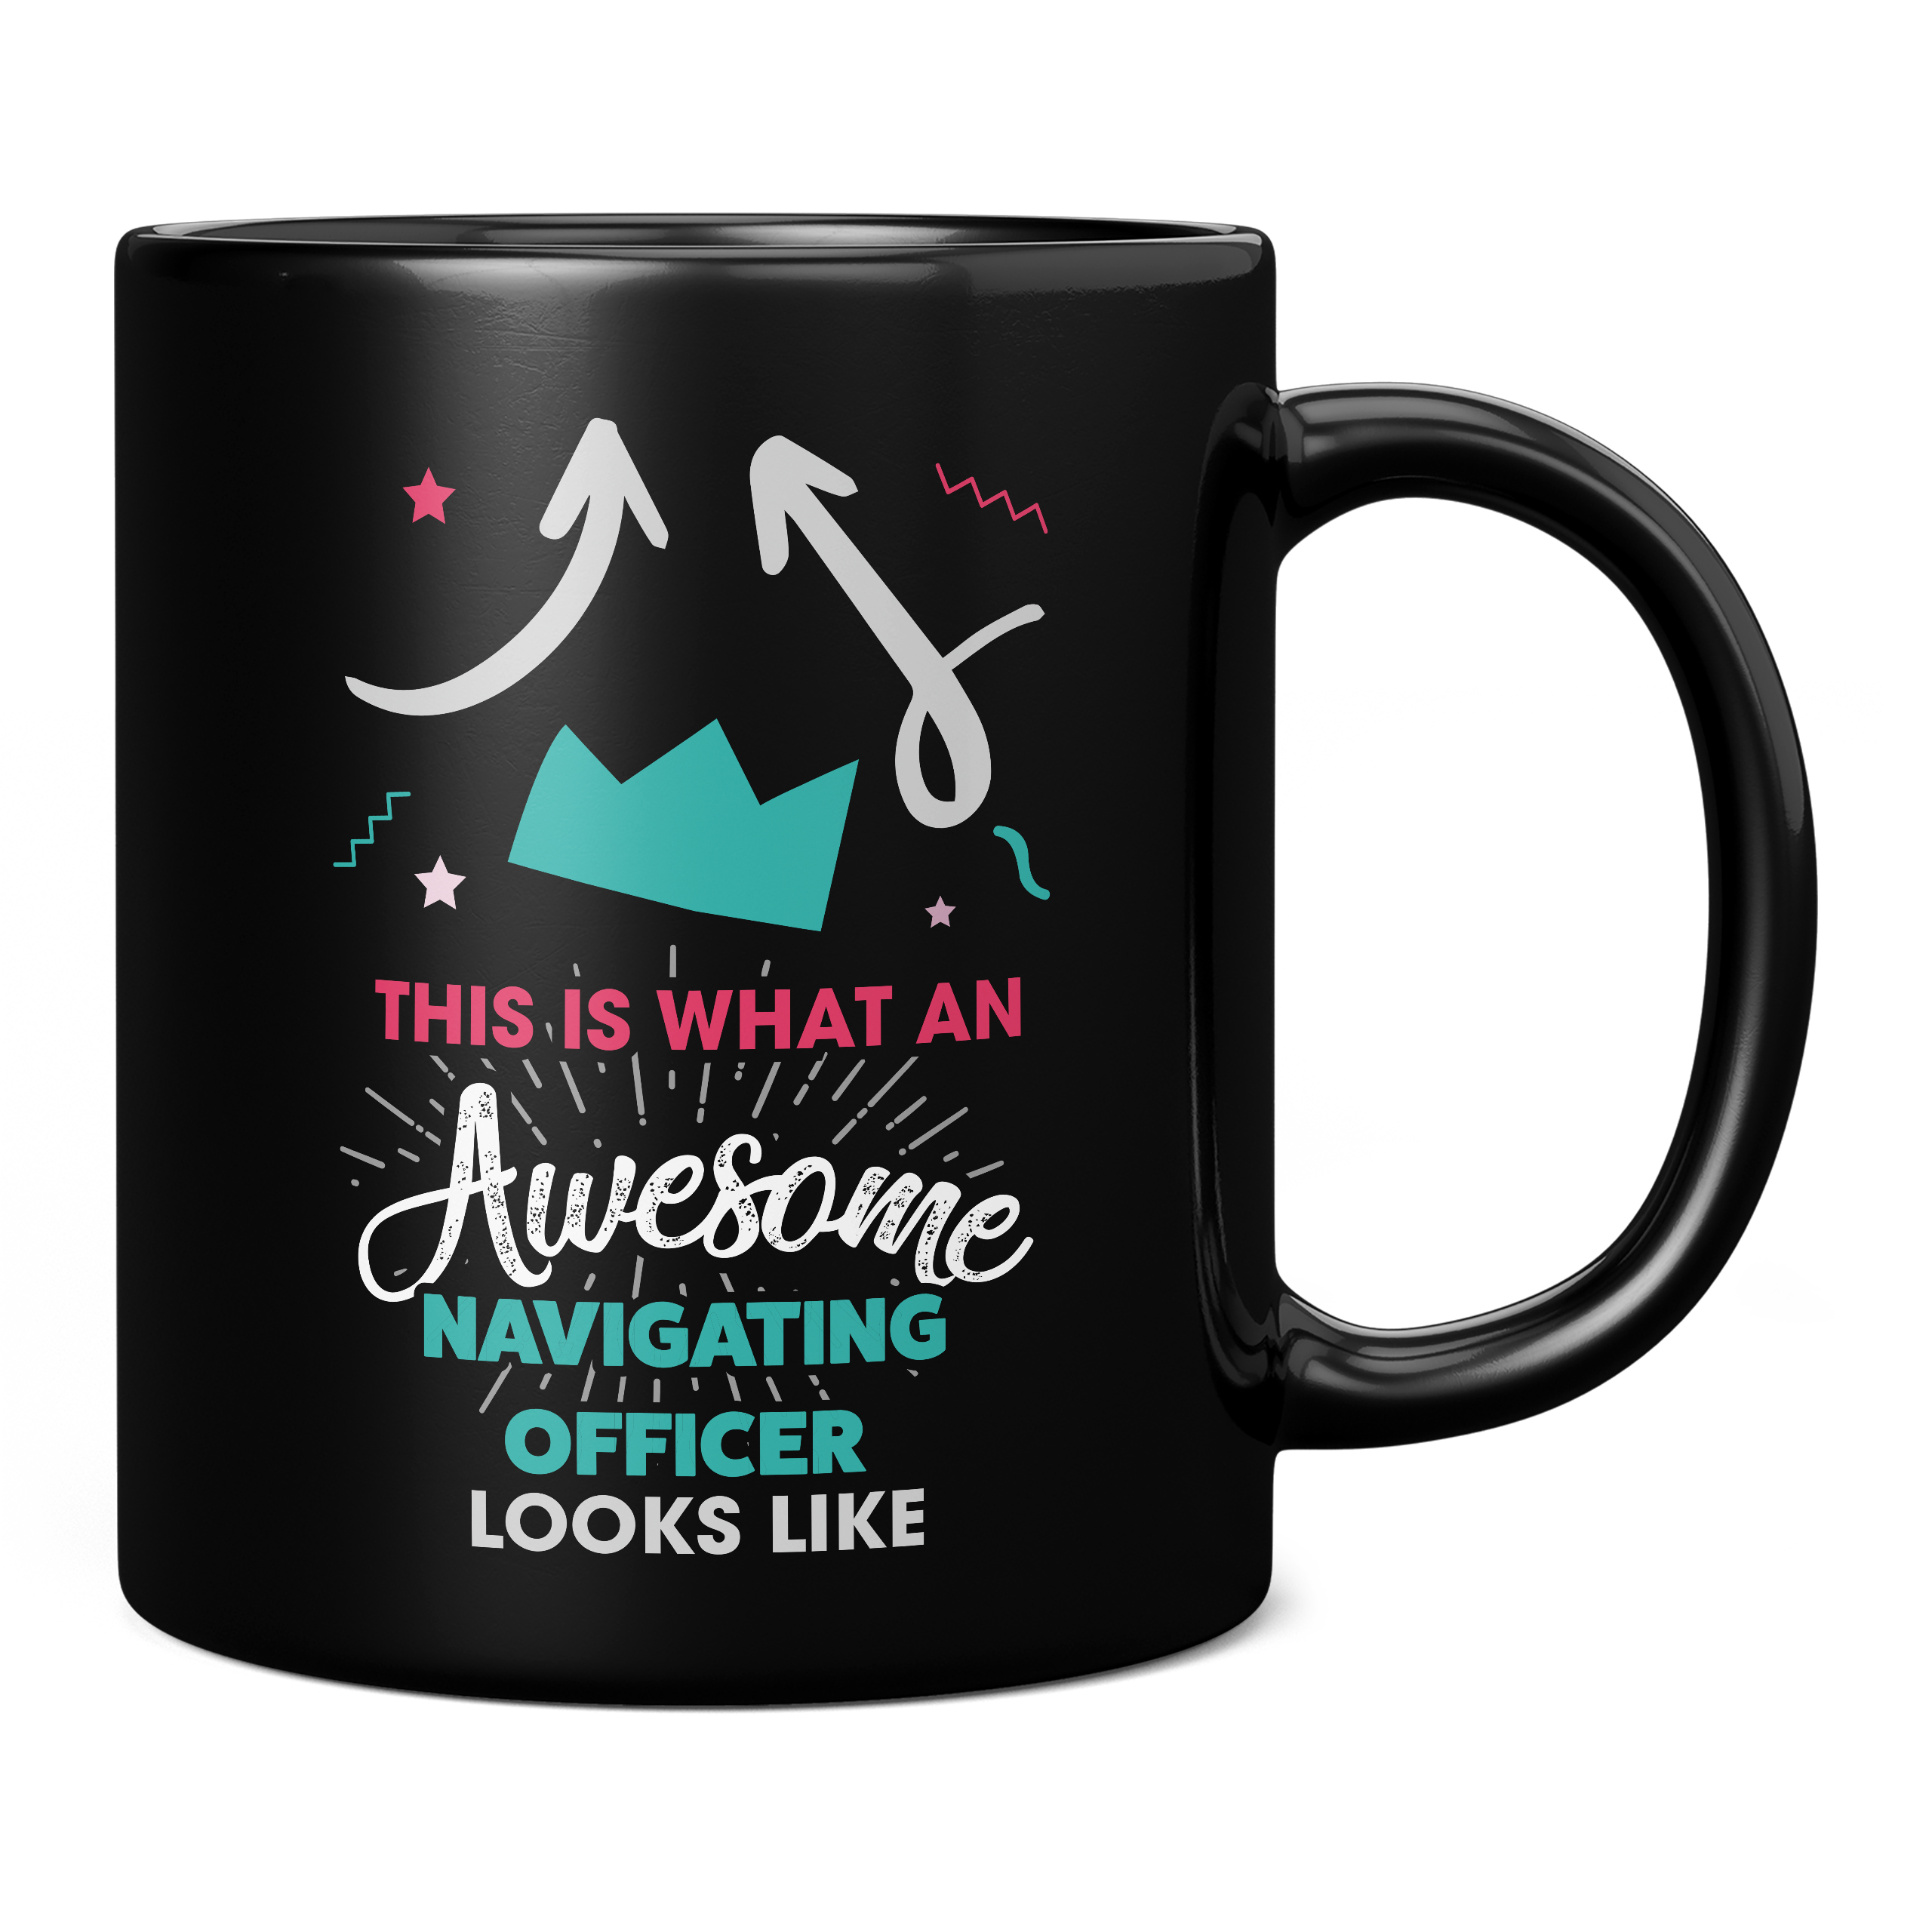 THIS IS WHAT AN AWESOME NAVIGATING OFFICER LOOKS LIKE 11OZ NOVELTY MUG